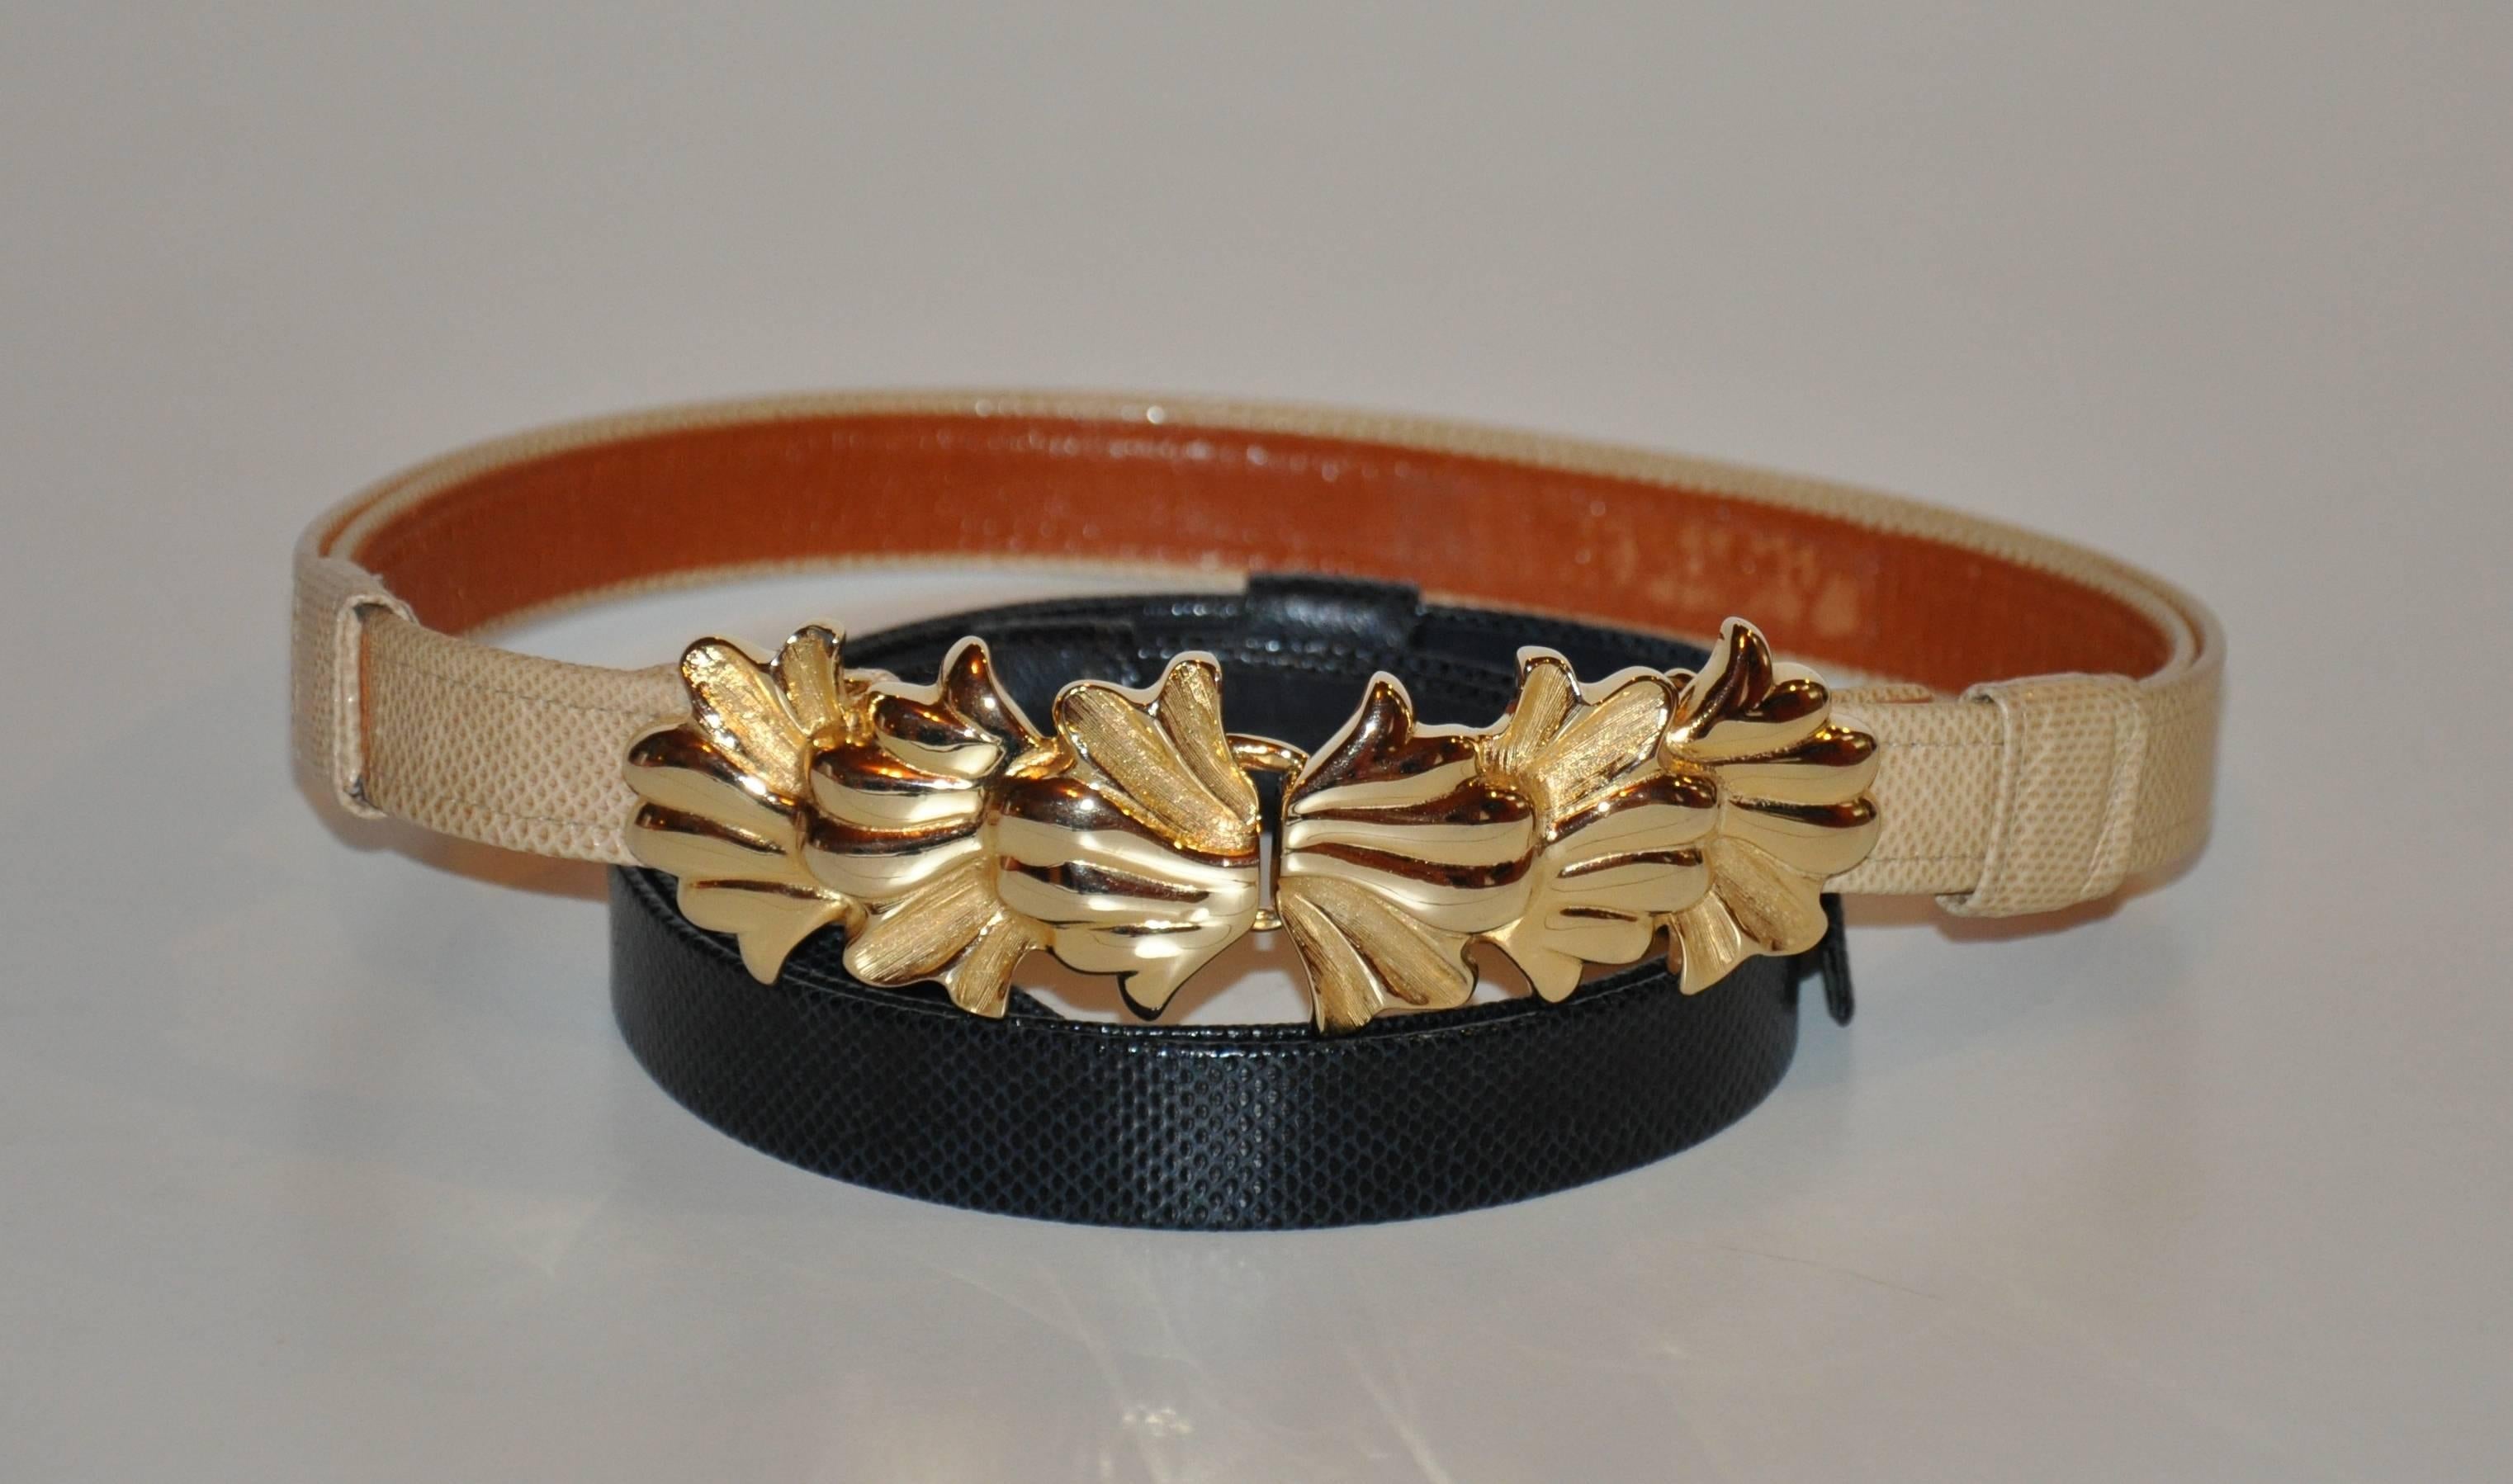             Alexis Kirk bold gilded gold hardware belt buckle with vermeil finish comes with a choice of two textured leather adjustable belts, one in beige lined with tan leather. And the other a textured black leather lined with black leather.